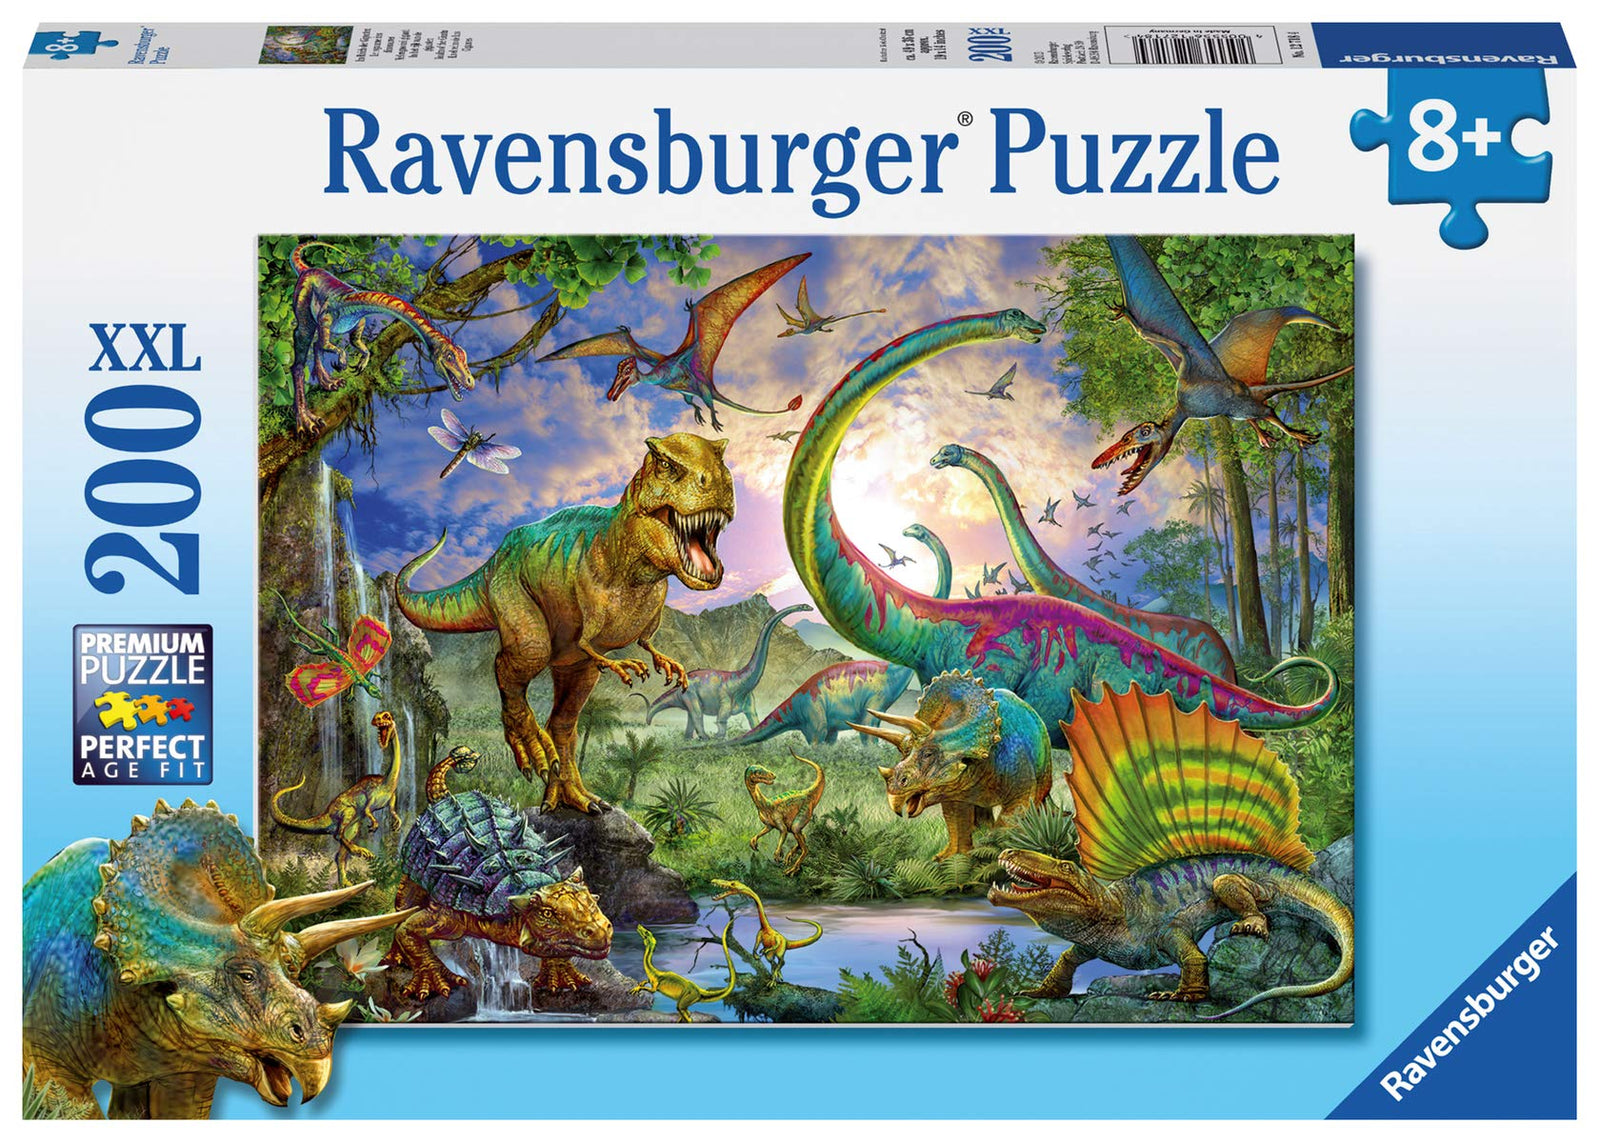 Ravensburger Realm of the Giants 200 Piece Jigsaw Puzzle for Kids – Every Piece is Unique, Pieces Fit Together Perfectly